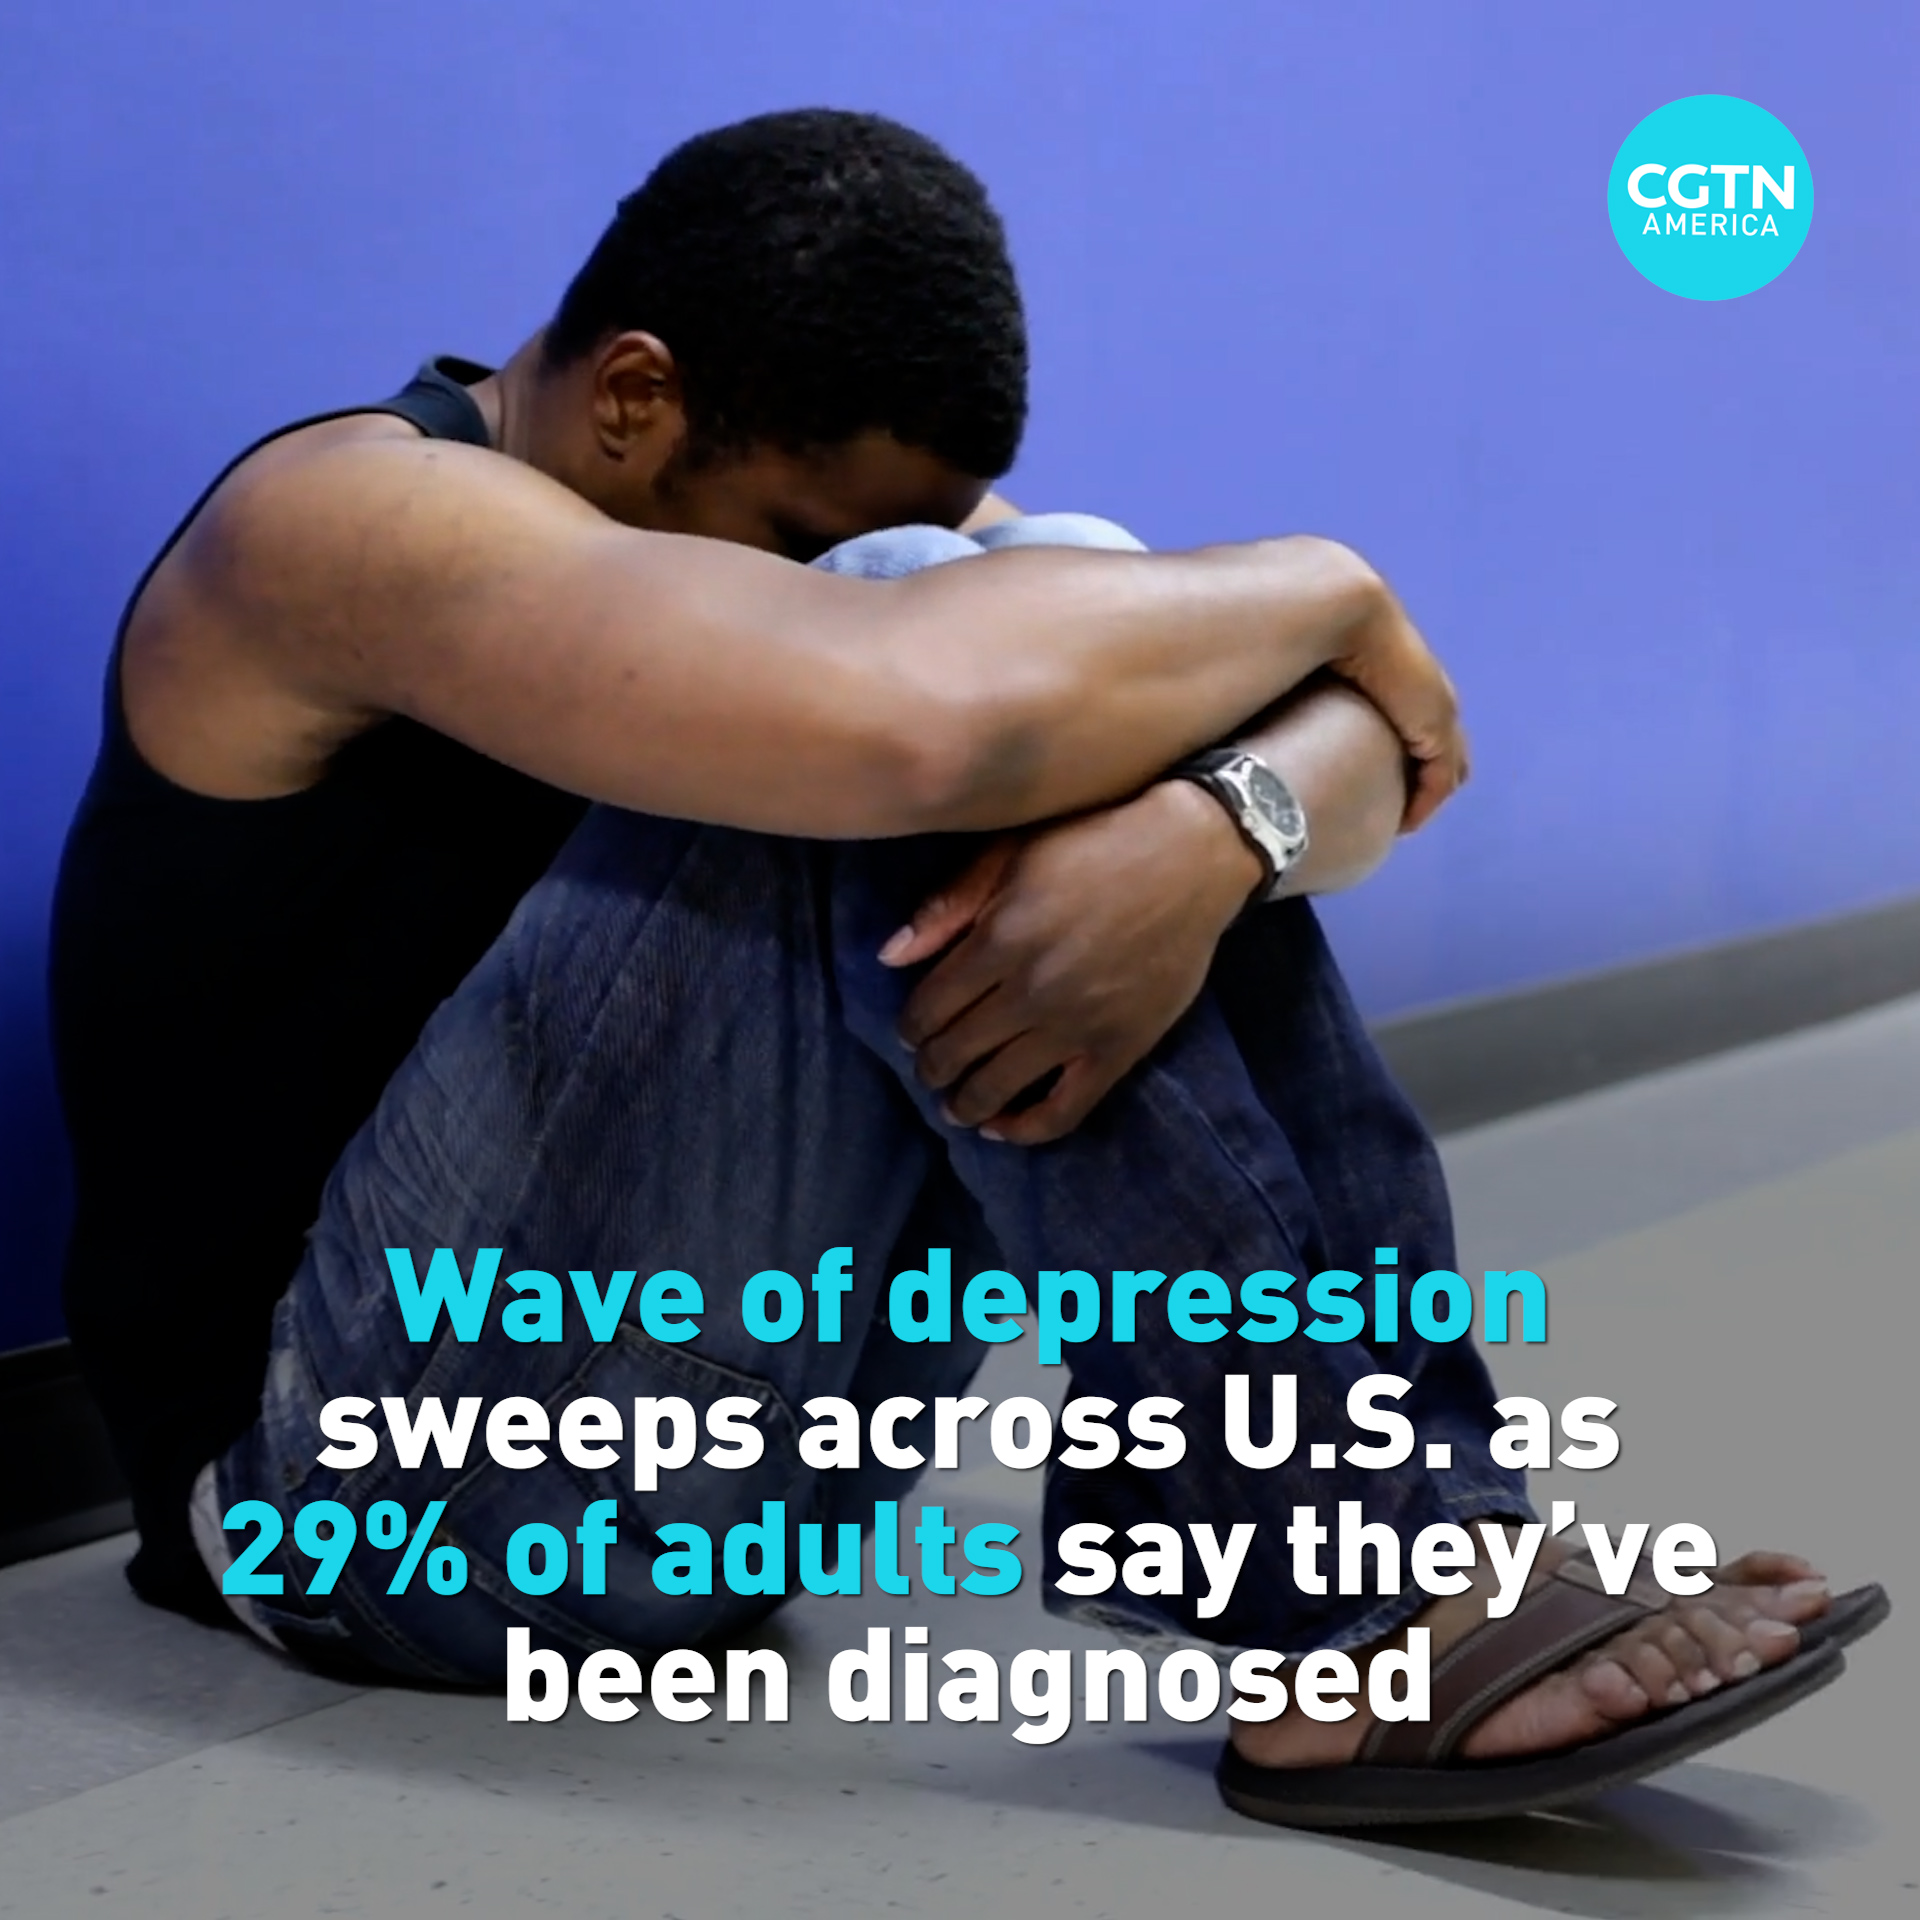 Wave of depression sweeps across U.S. as 29% of adults say they’ve been diagnosed 